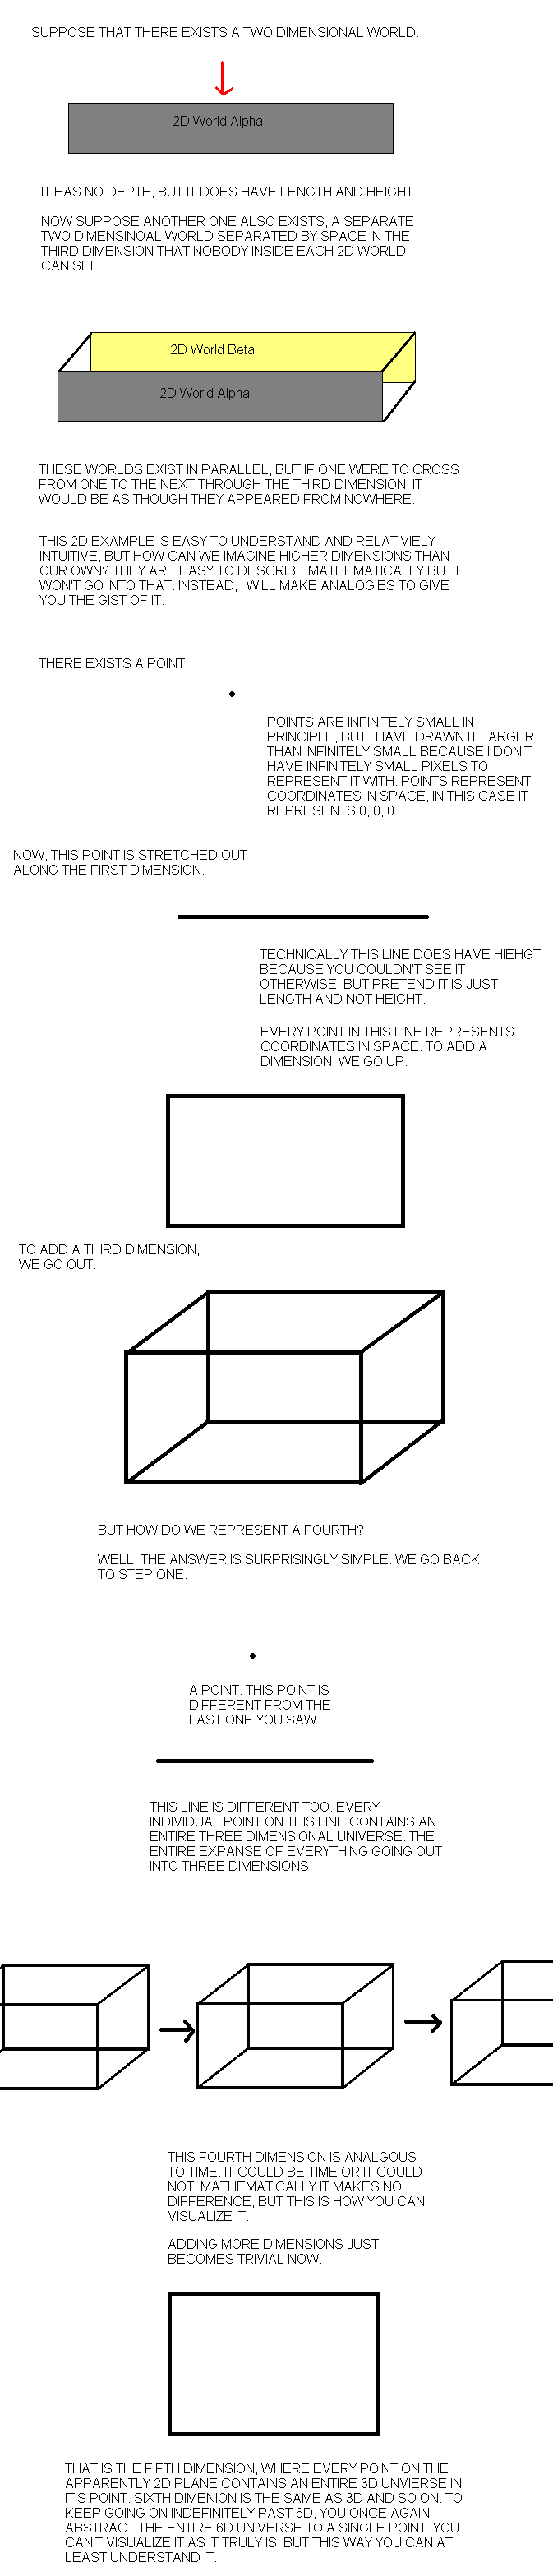 dimensions_explained0mmc.png